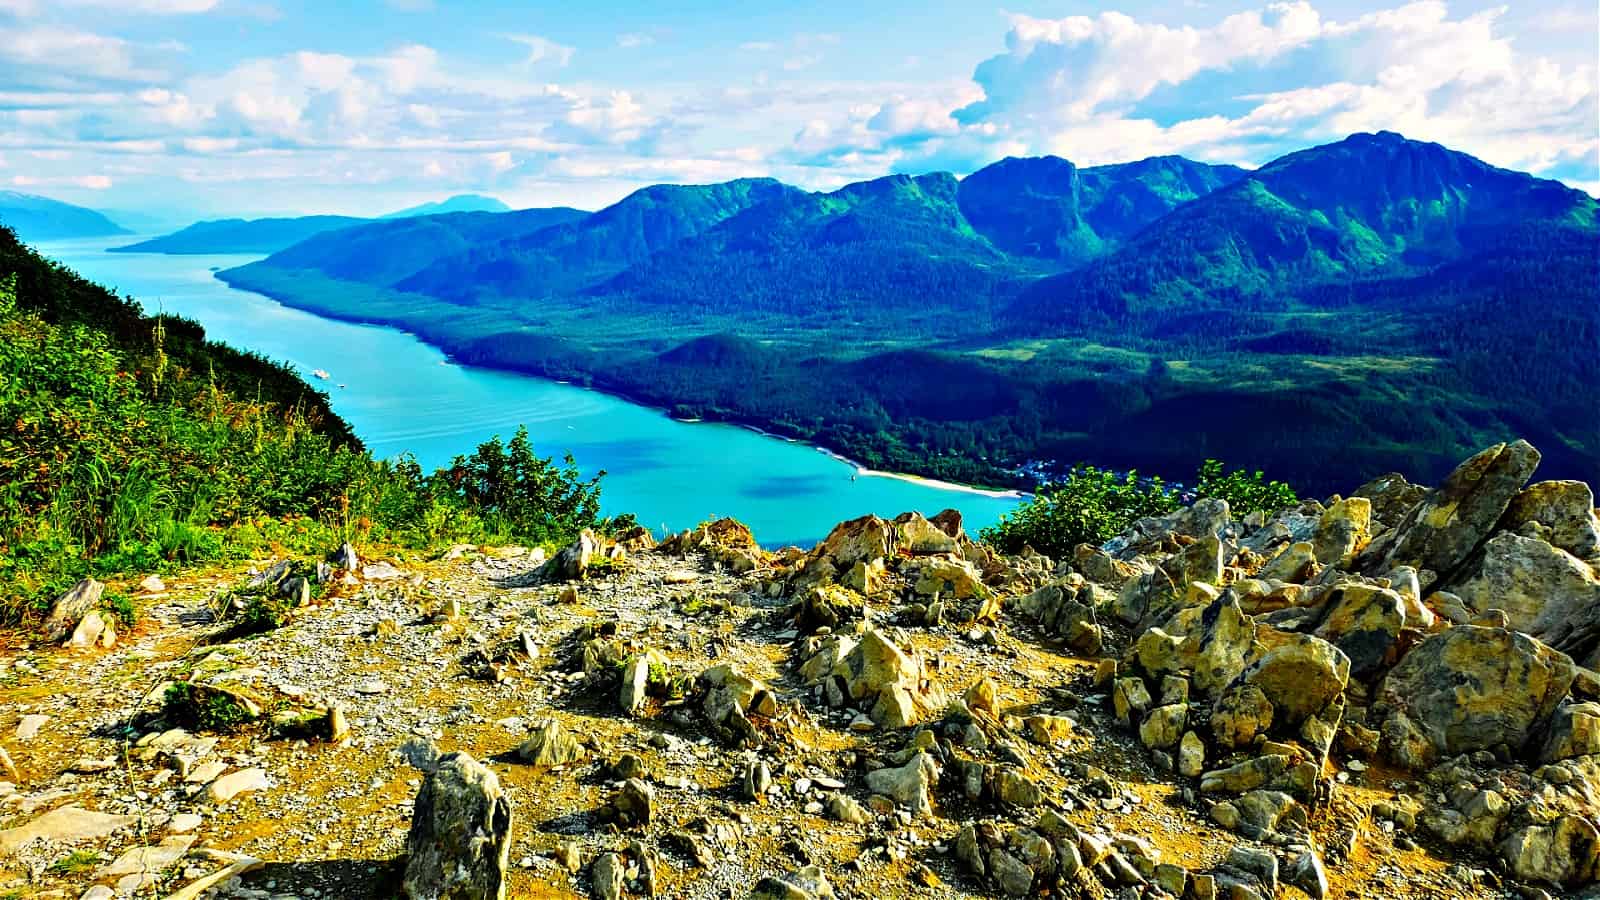 View of Gastineau Channel and Douglas Island from the top of Mt Roberts in Juneau, Alaska